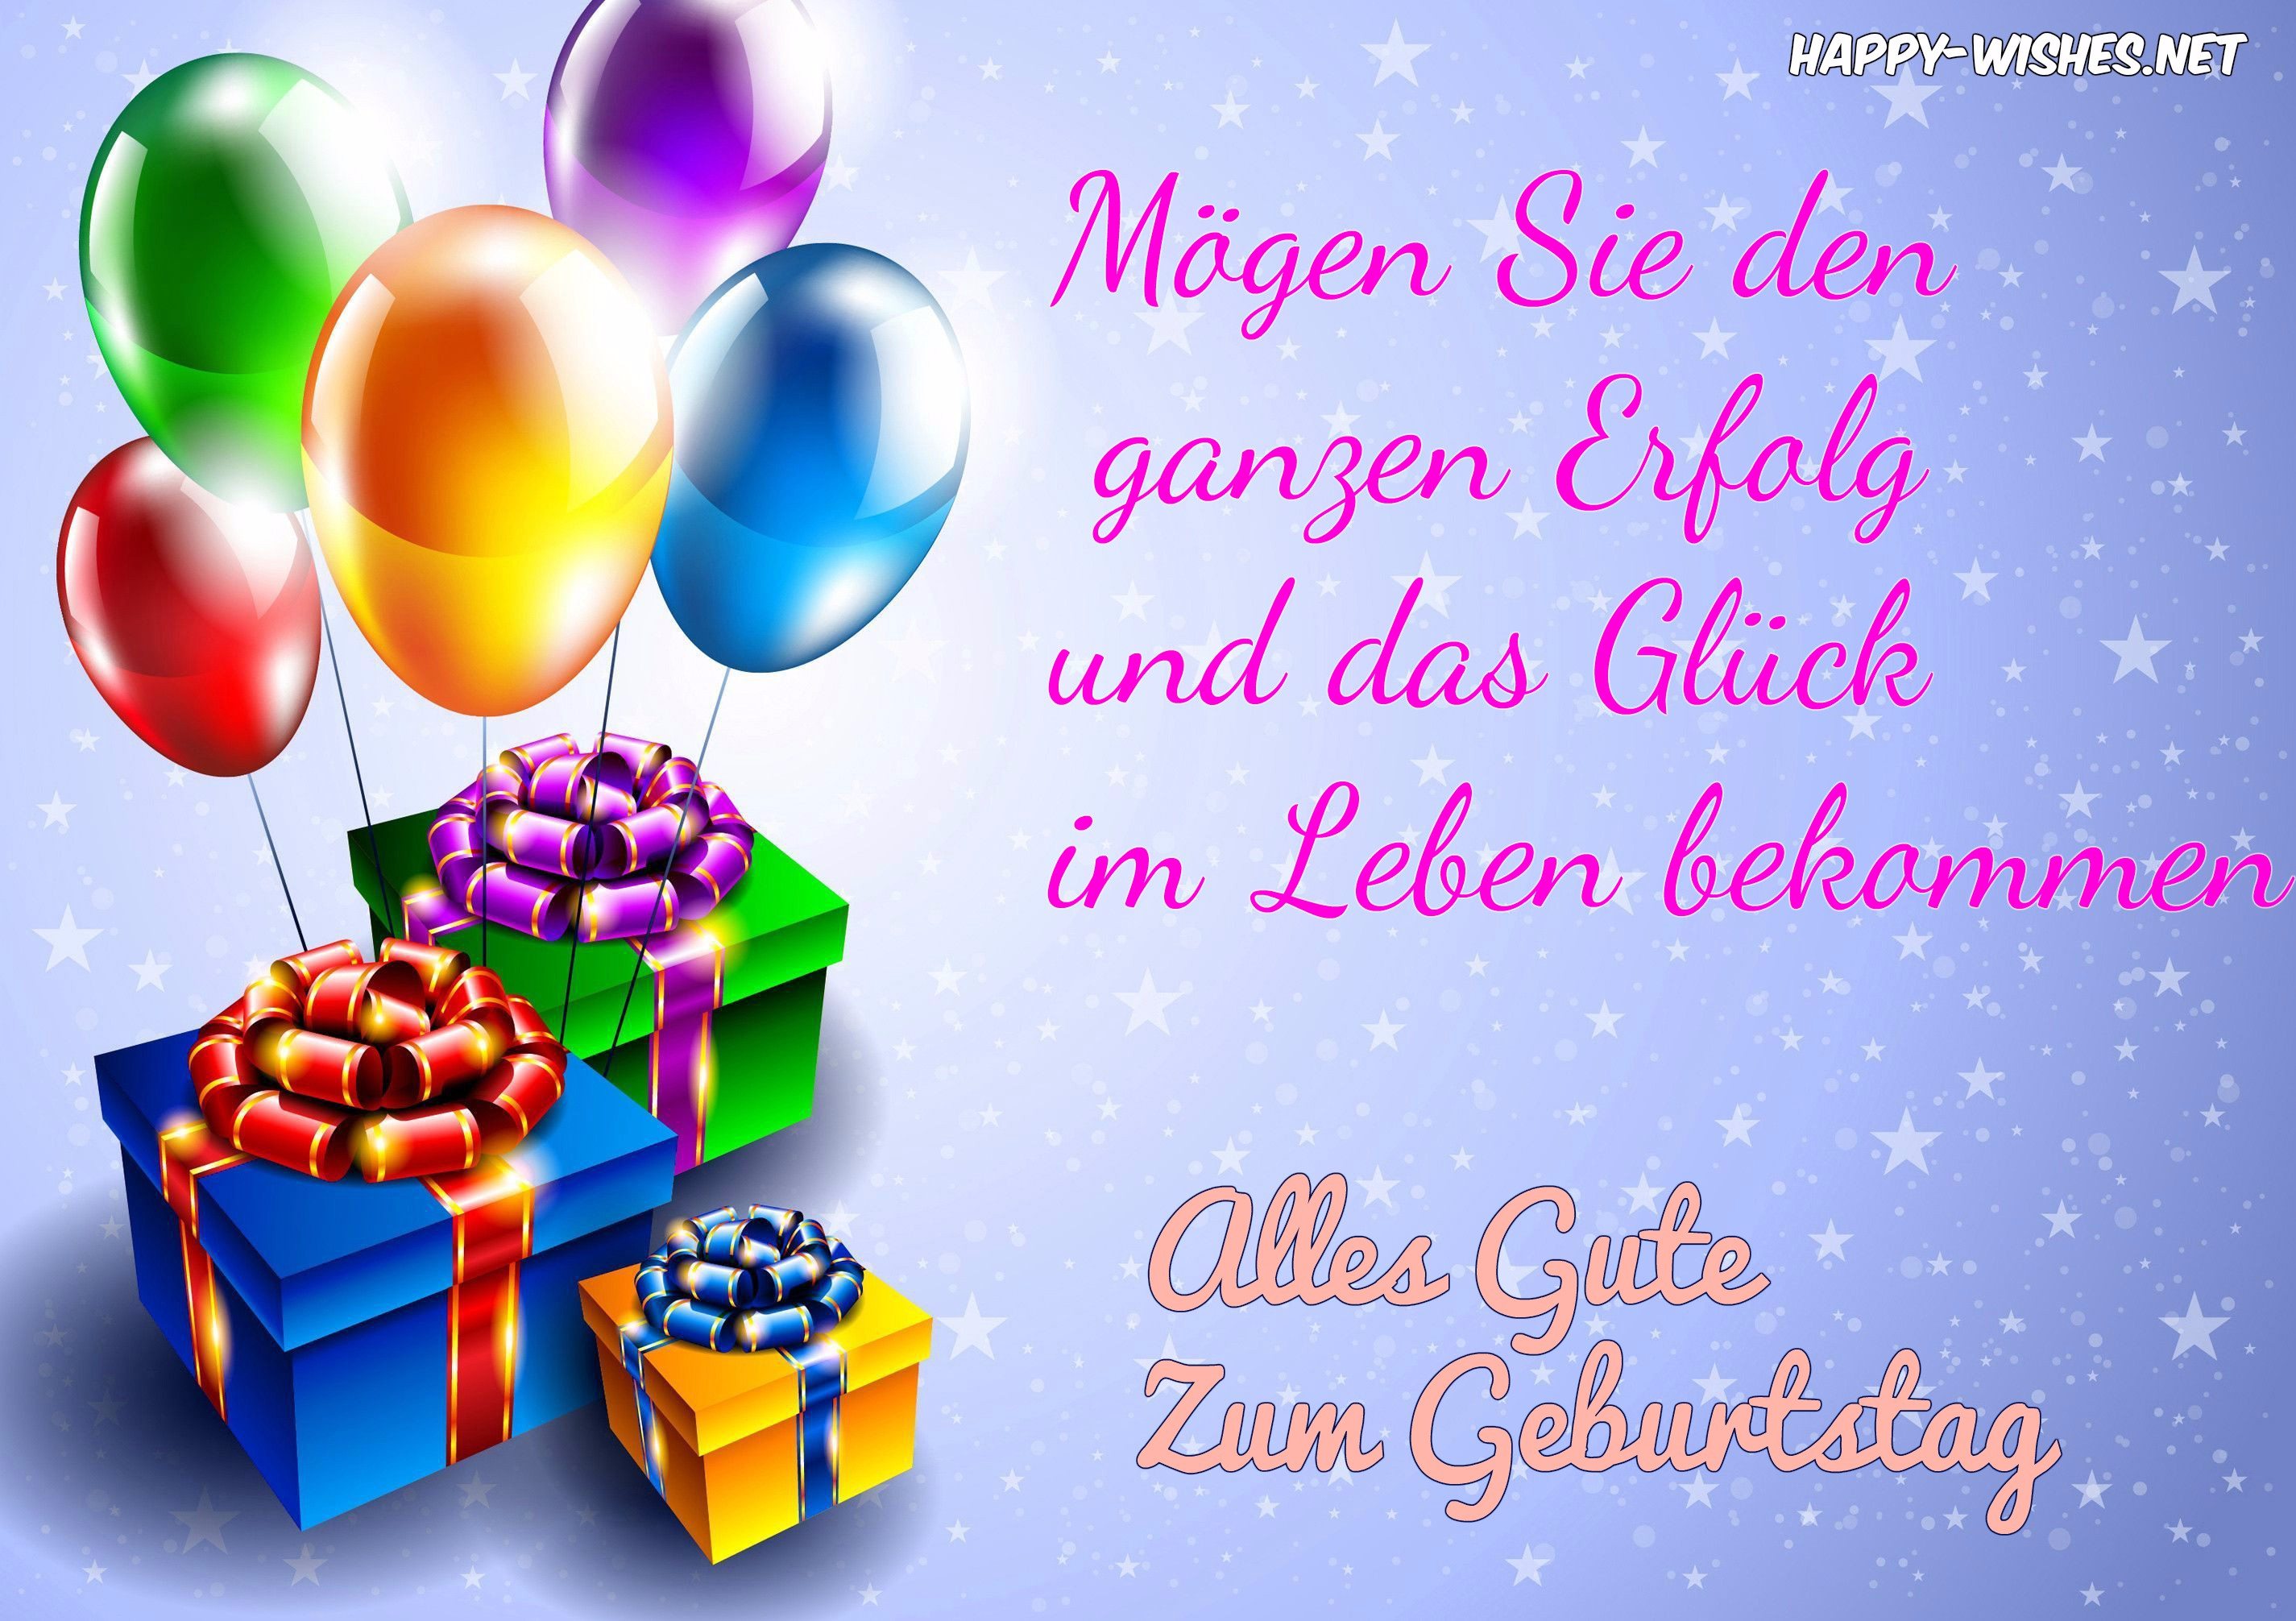 Happy Birthday Wishes in German